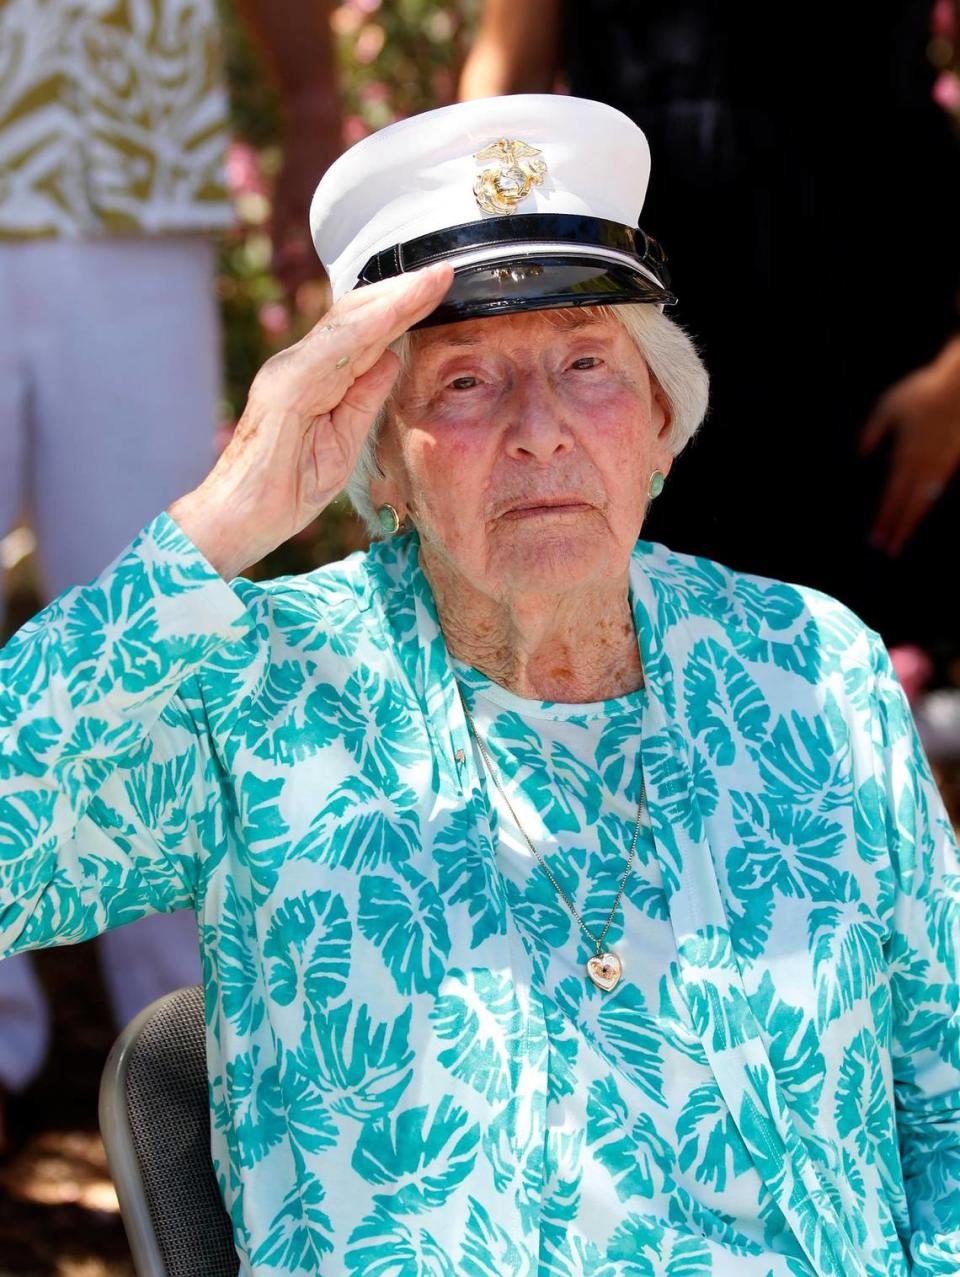 U.S. Marine Corps veteran Sgt. Elizabeth Ross salutes during a July 2, 2022, birthday celebration hosted by Welcome Home Military Heroes at her daughter’s San Luis Obispo home. Ross turns 100 on July 5.